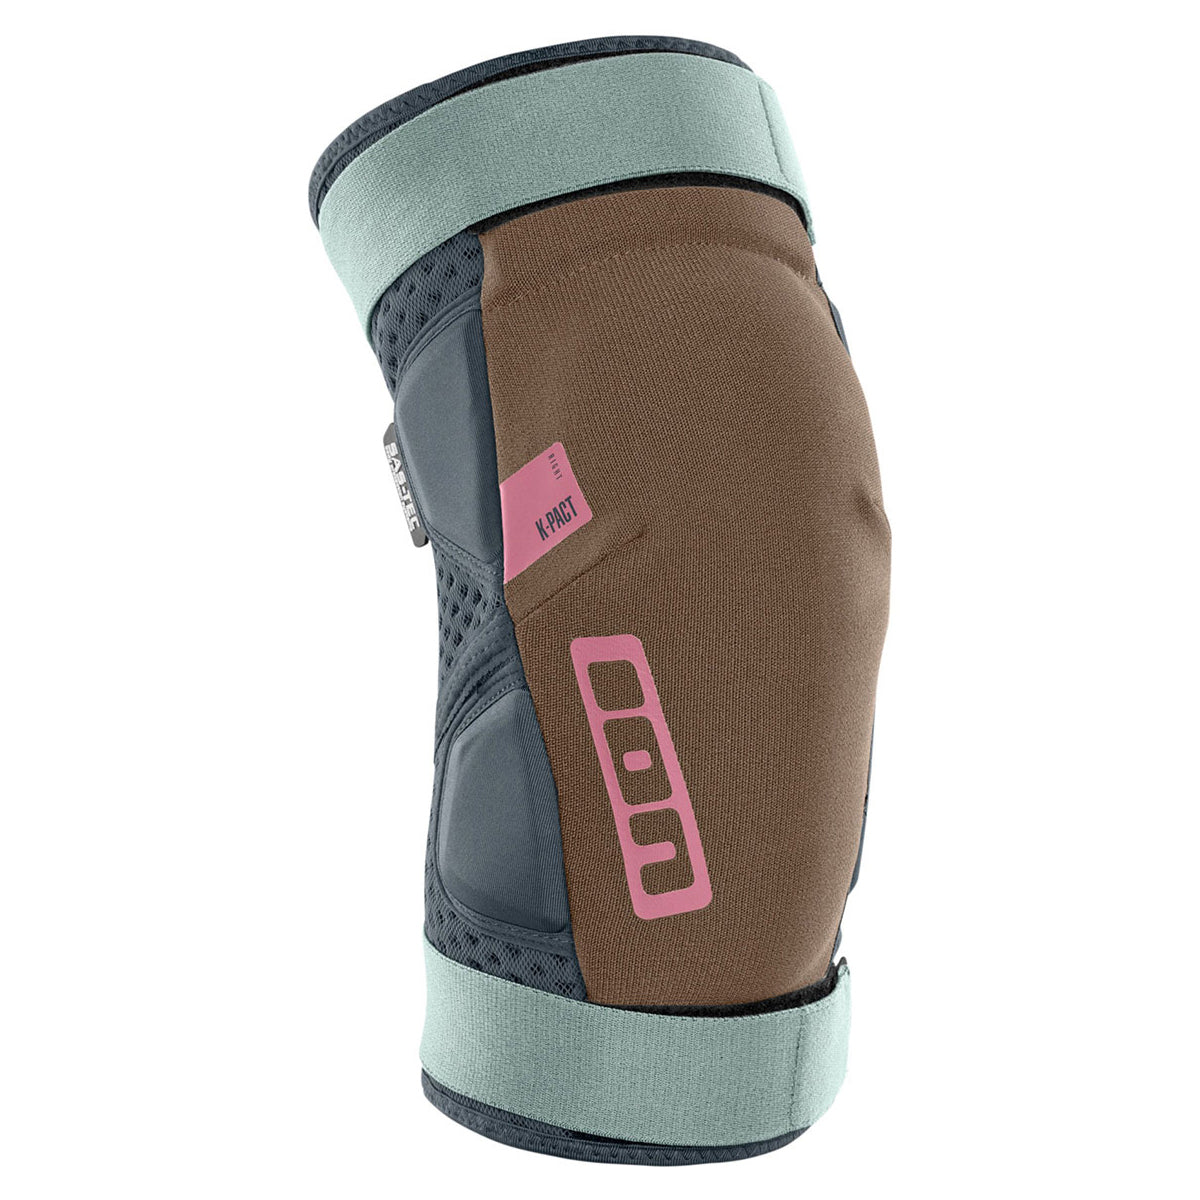 Ion K-Pact Knee Pads - XL - Multicolour